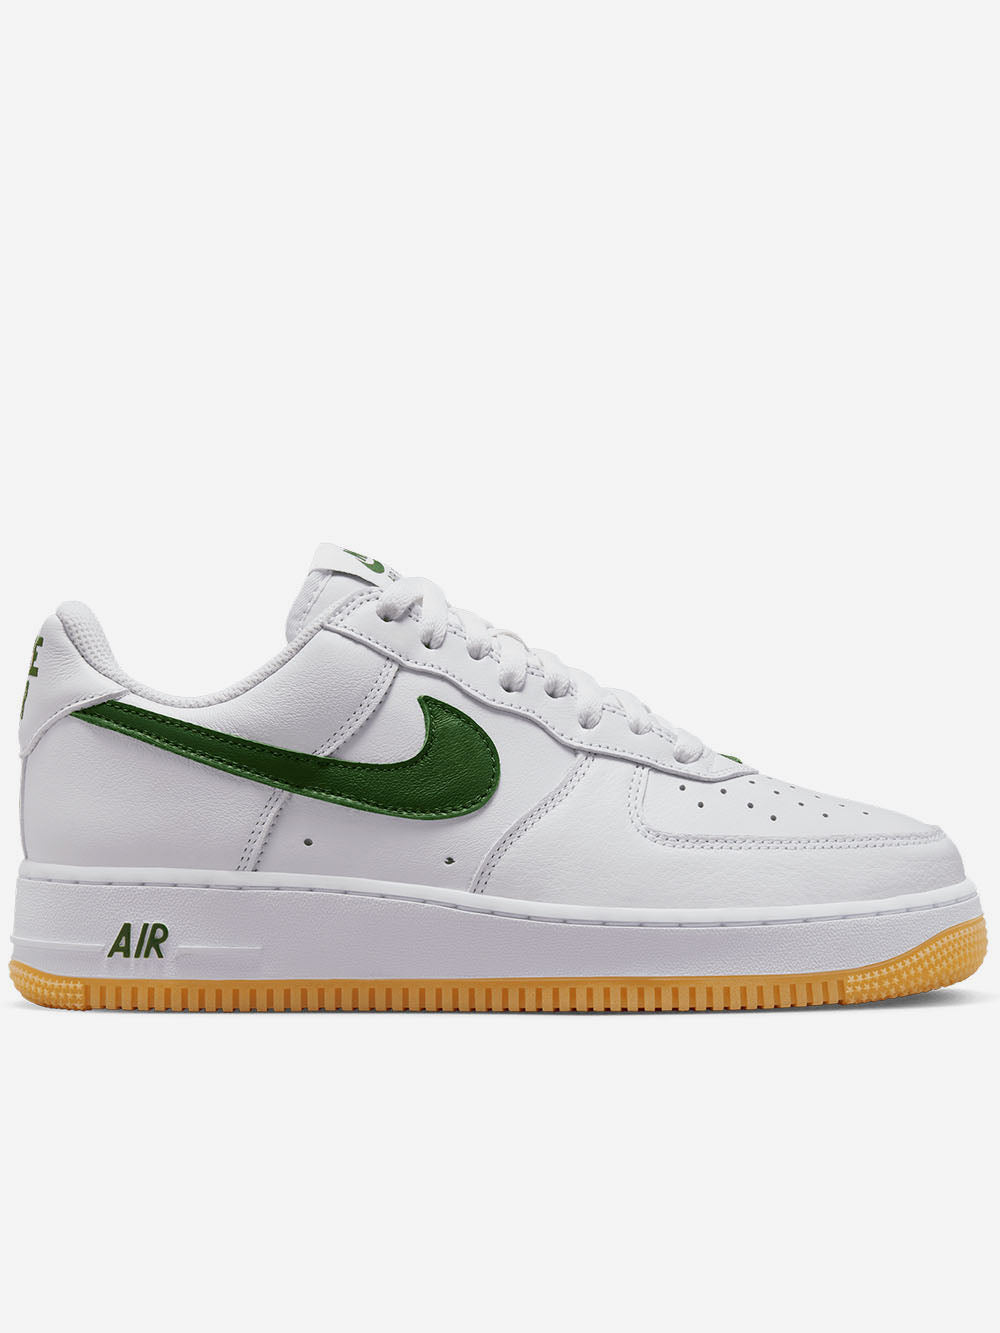 Nike Air Force 1 Low '07 Triple White - 48h Delivery